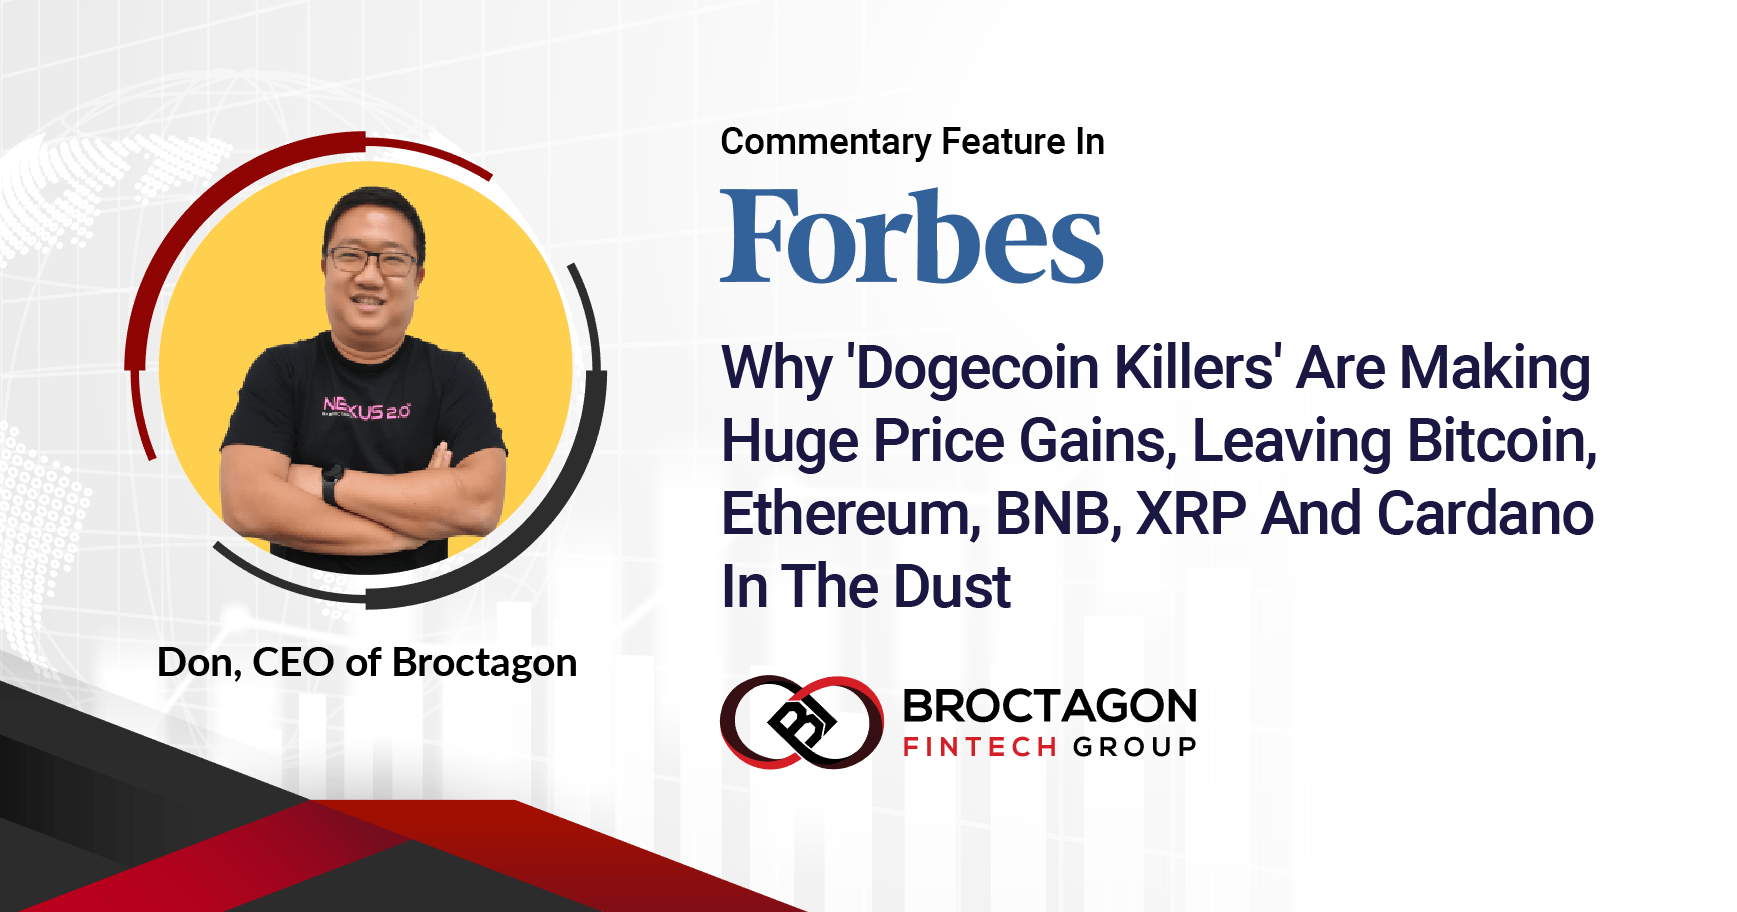 Commentary Feature: Why ‘Dogecoin Killers’ Are Making Huge Price Gains, Leaving Bitcoin, Ethereum, BNB, XRP And Cardano In The Dust